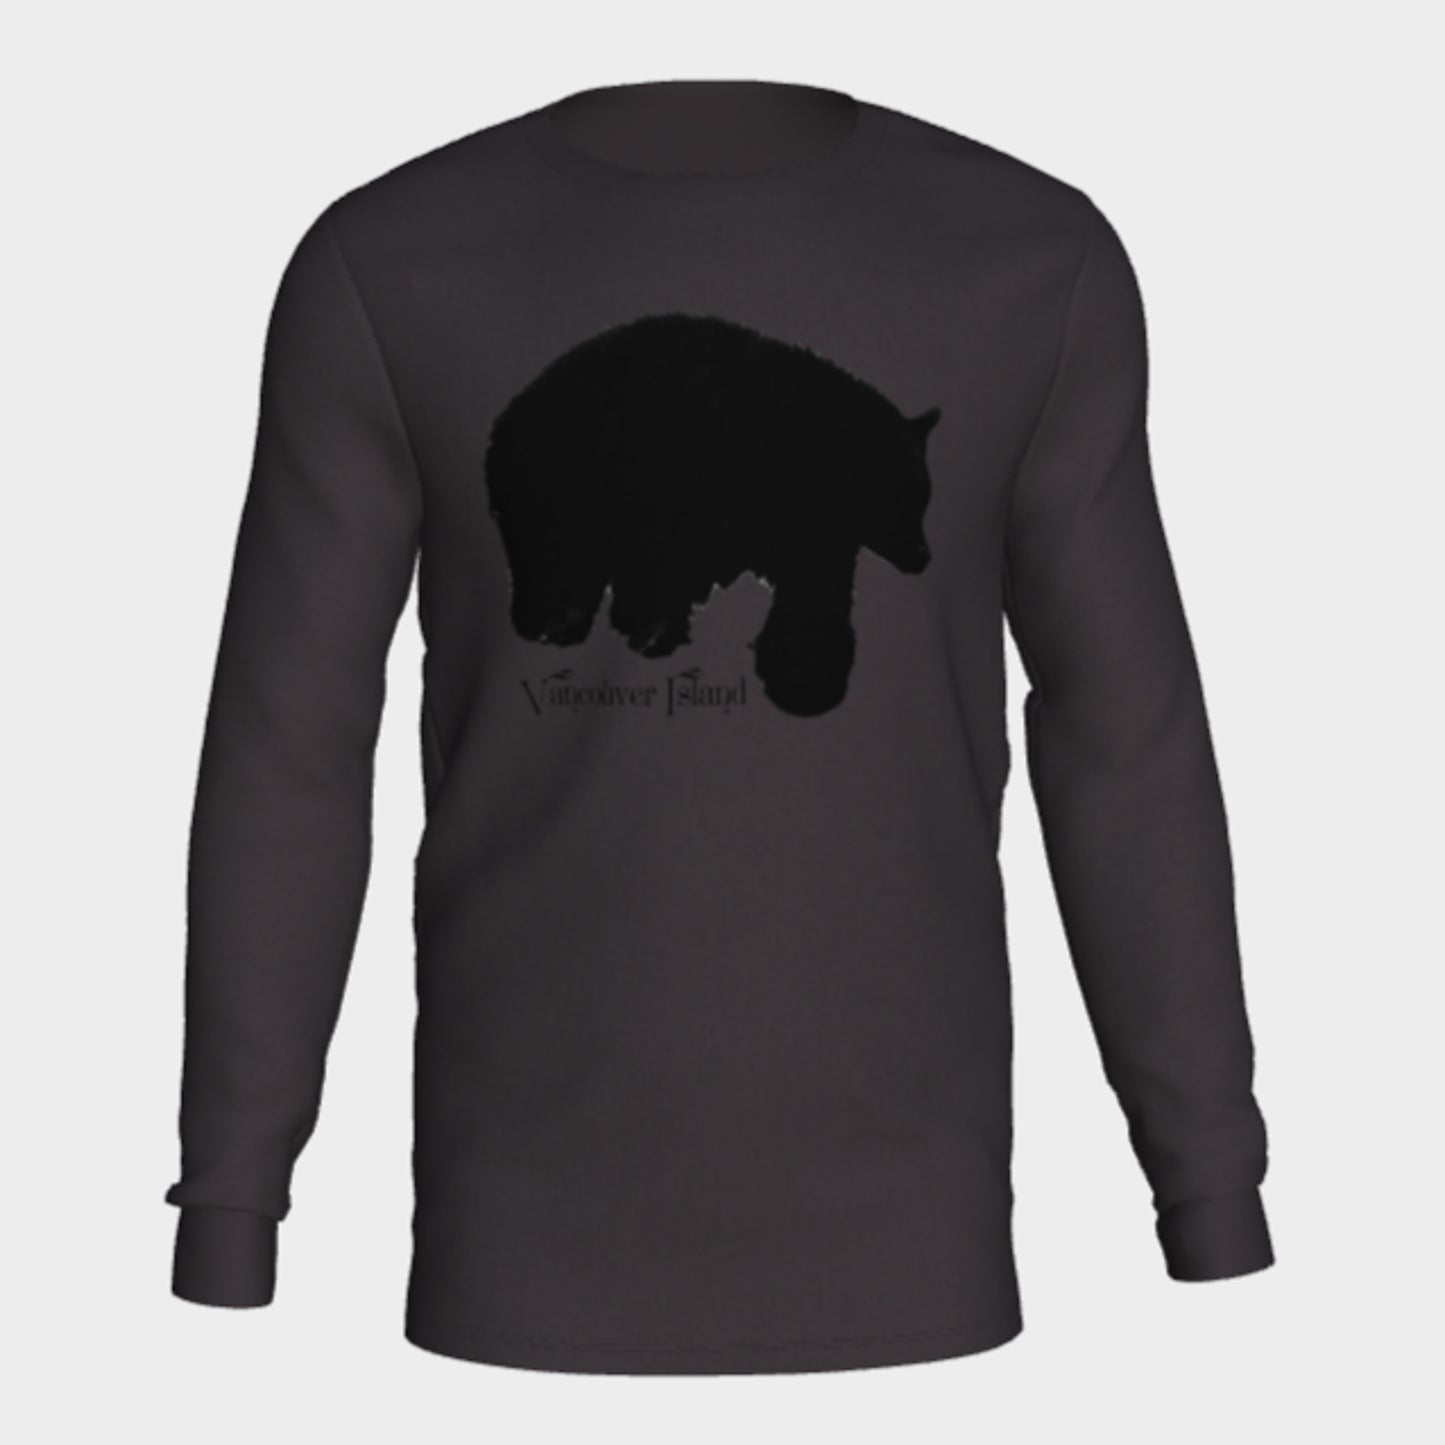 Bear Vancouver Island (Black Print) Long Sleeve Unisex T-Shirt Van Isle Goddess 100% cotton crew neck long sleeve super comfy tee is a must-have basic for any wardrobe.  Whether you’re going to a gig, a sports game, a rally, or just walking down the street, this lightweight, 100% cotton crew neck is perfect!